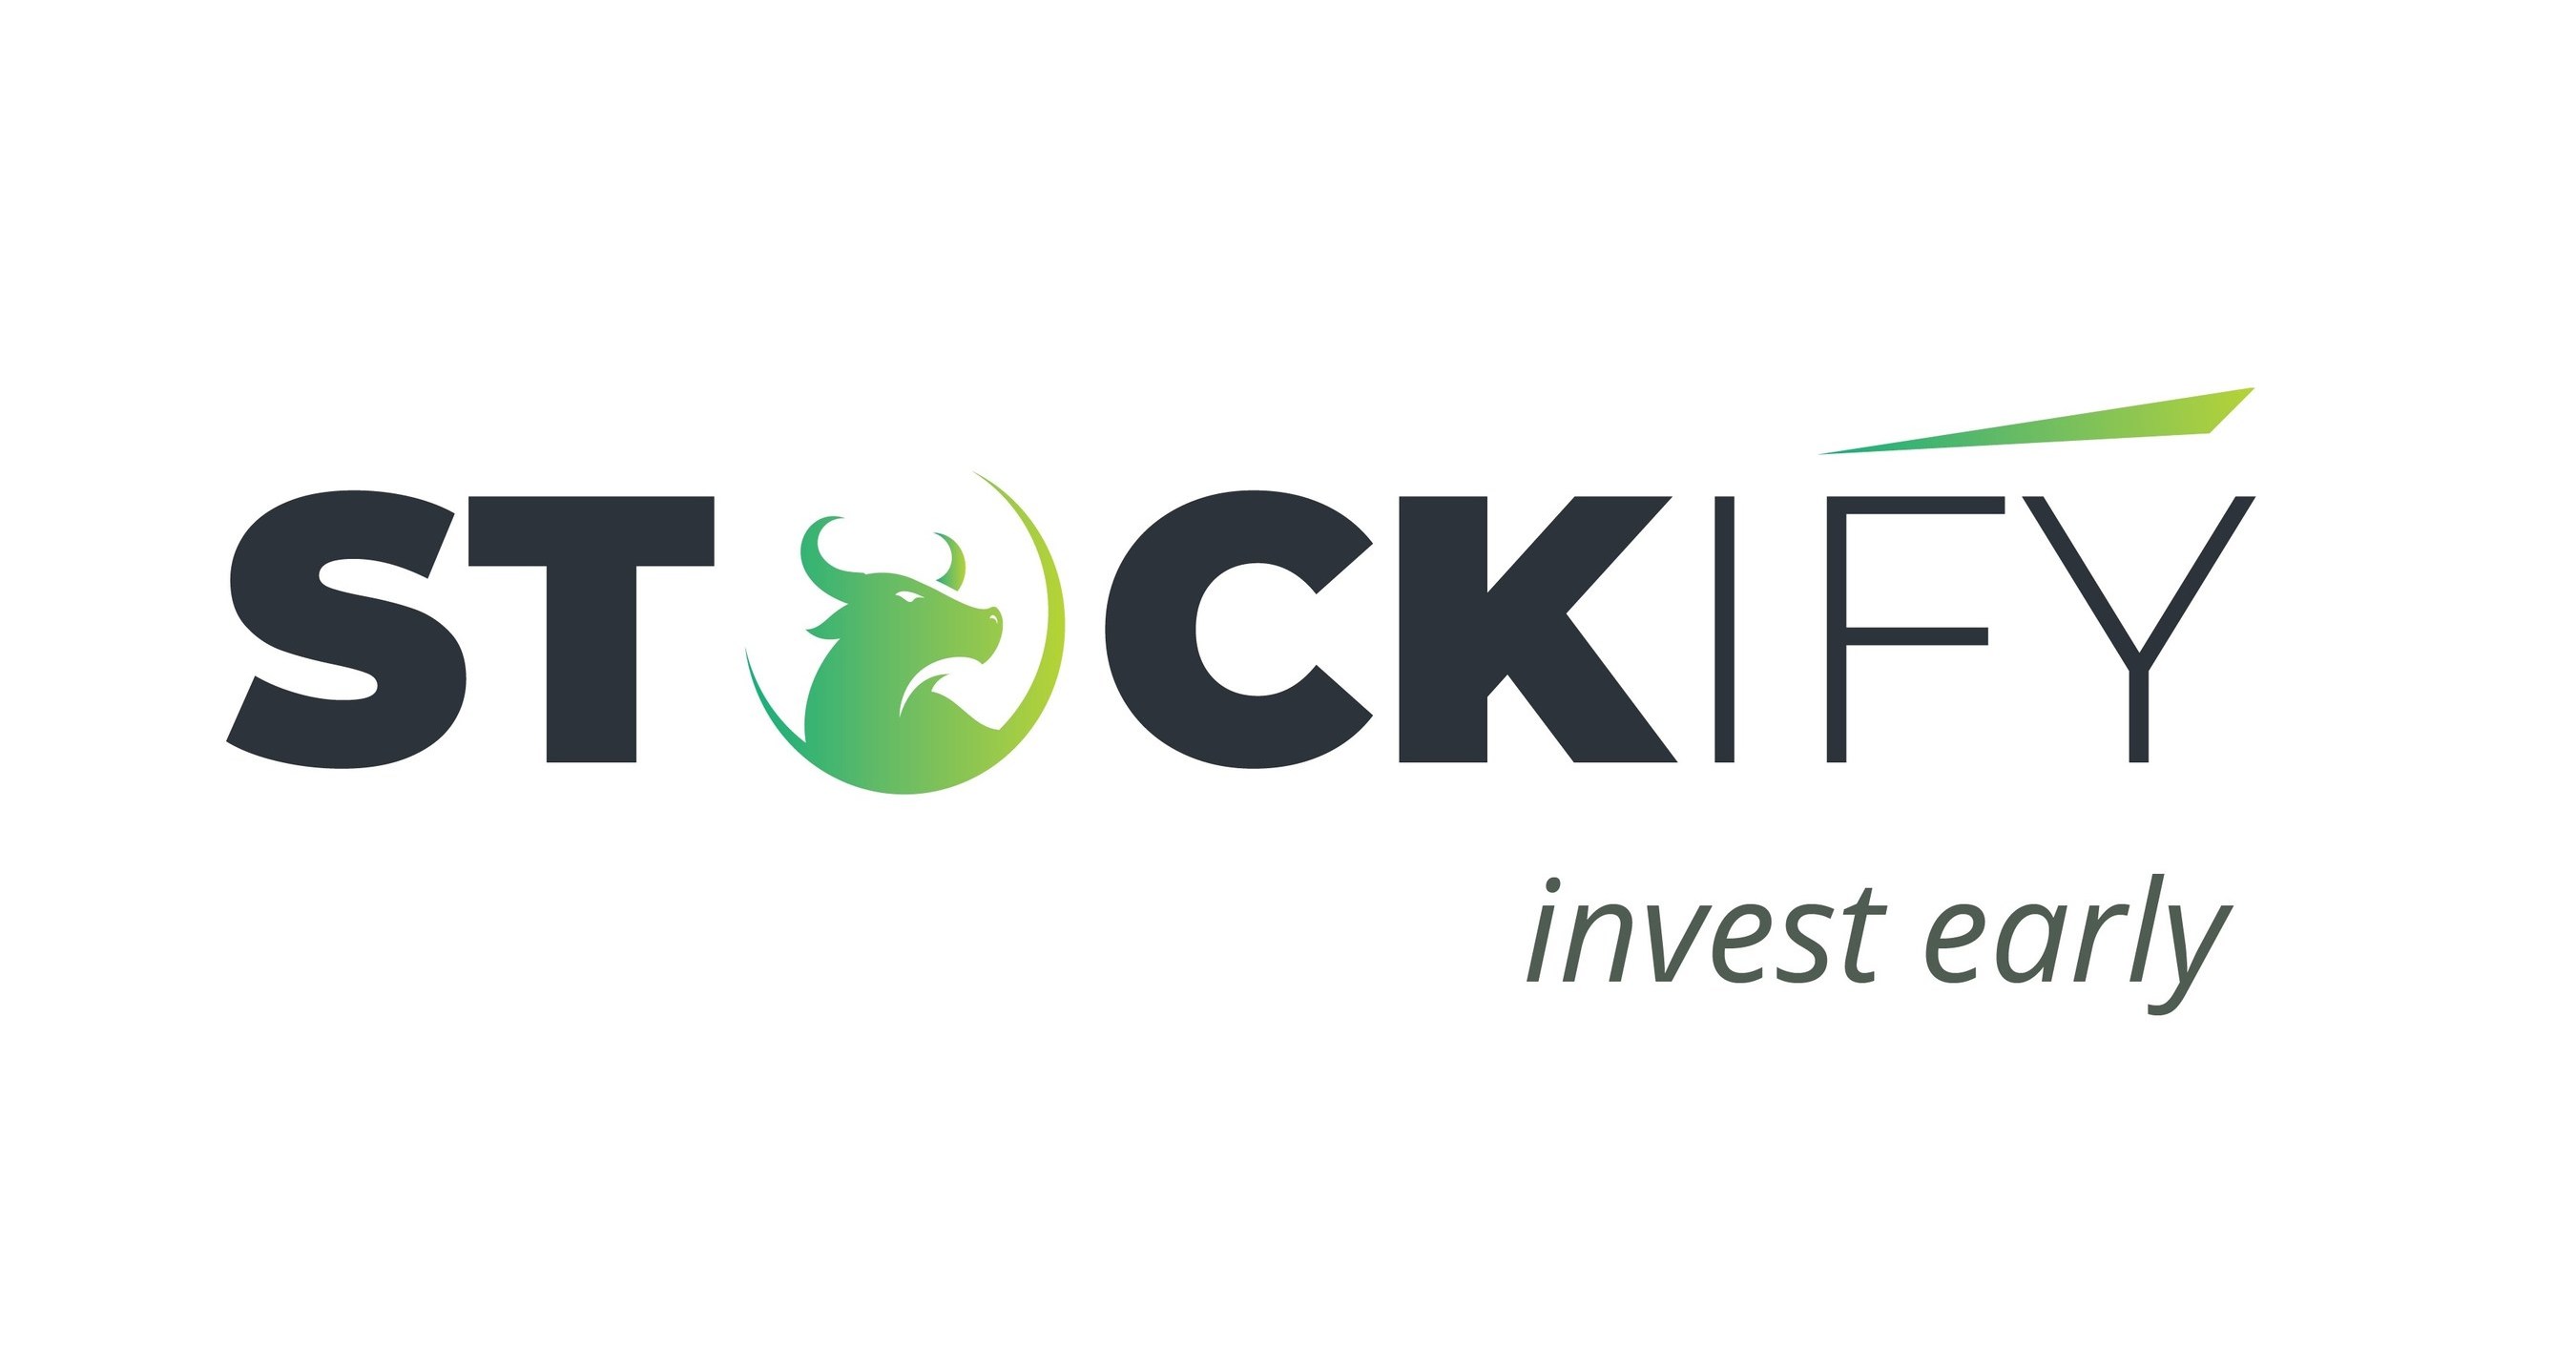 Stockify expands global reach with participation in Dubai Fintech Summit